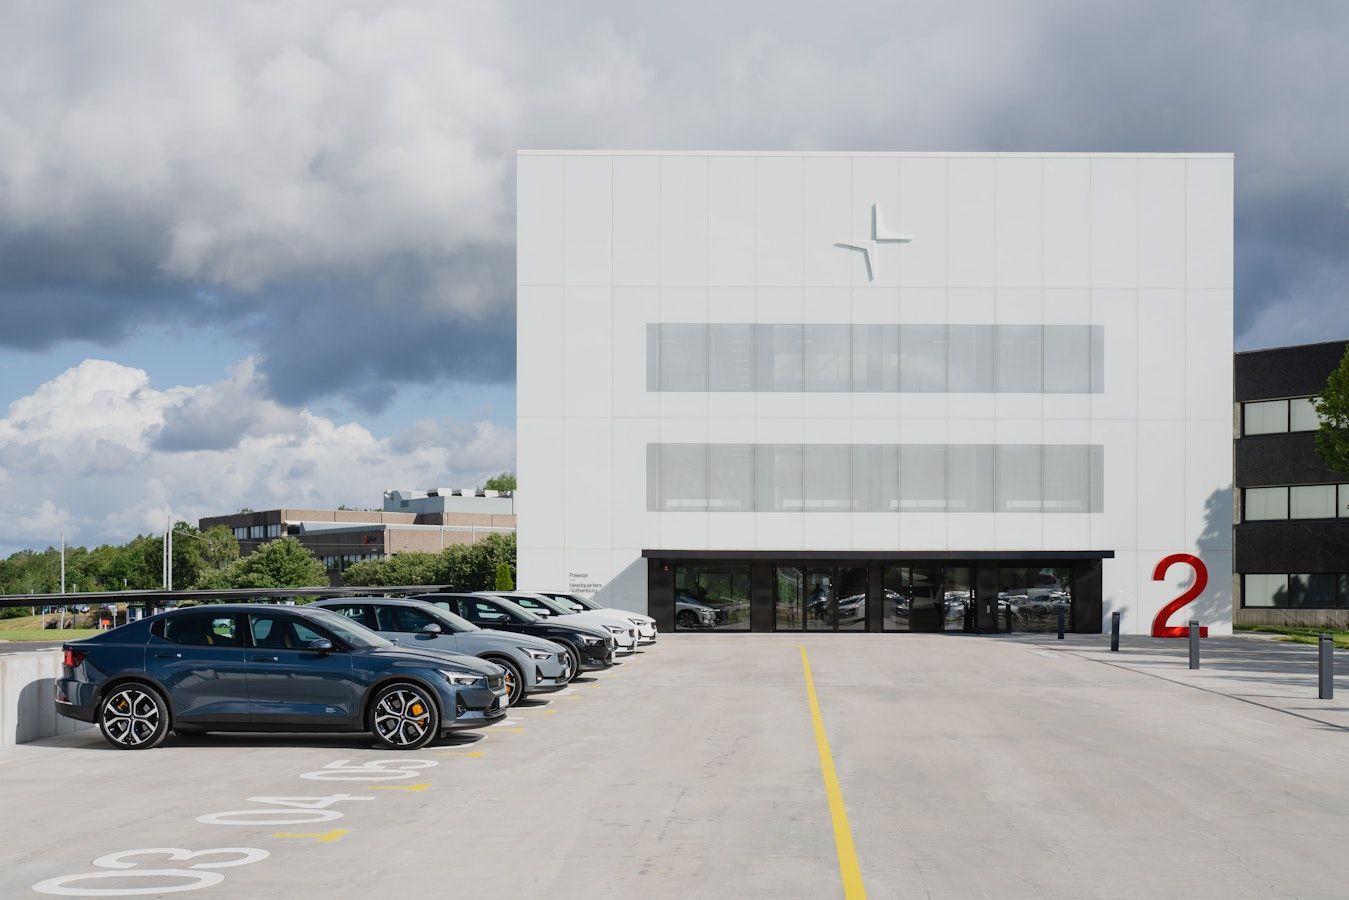 World EV Day is September 9th. And Polestar is a founding member